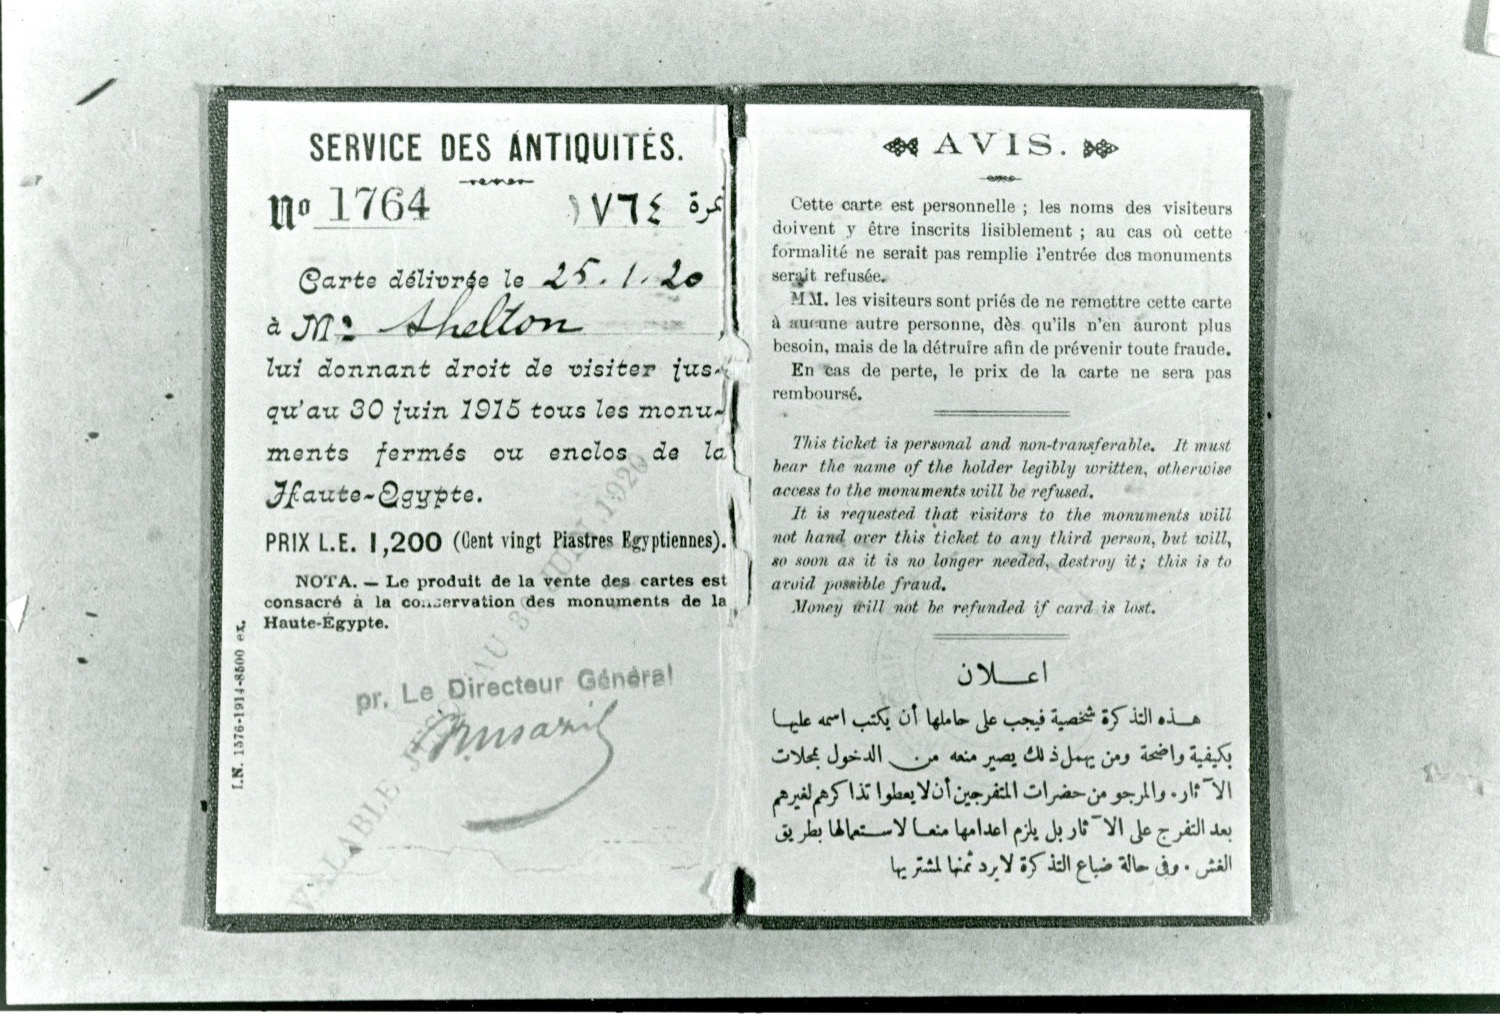 Shelton’s antiquities pass from 1920, issued by the Egyptian government